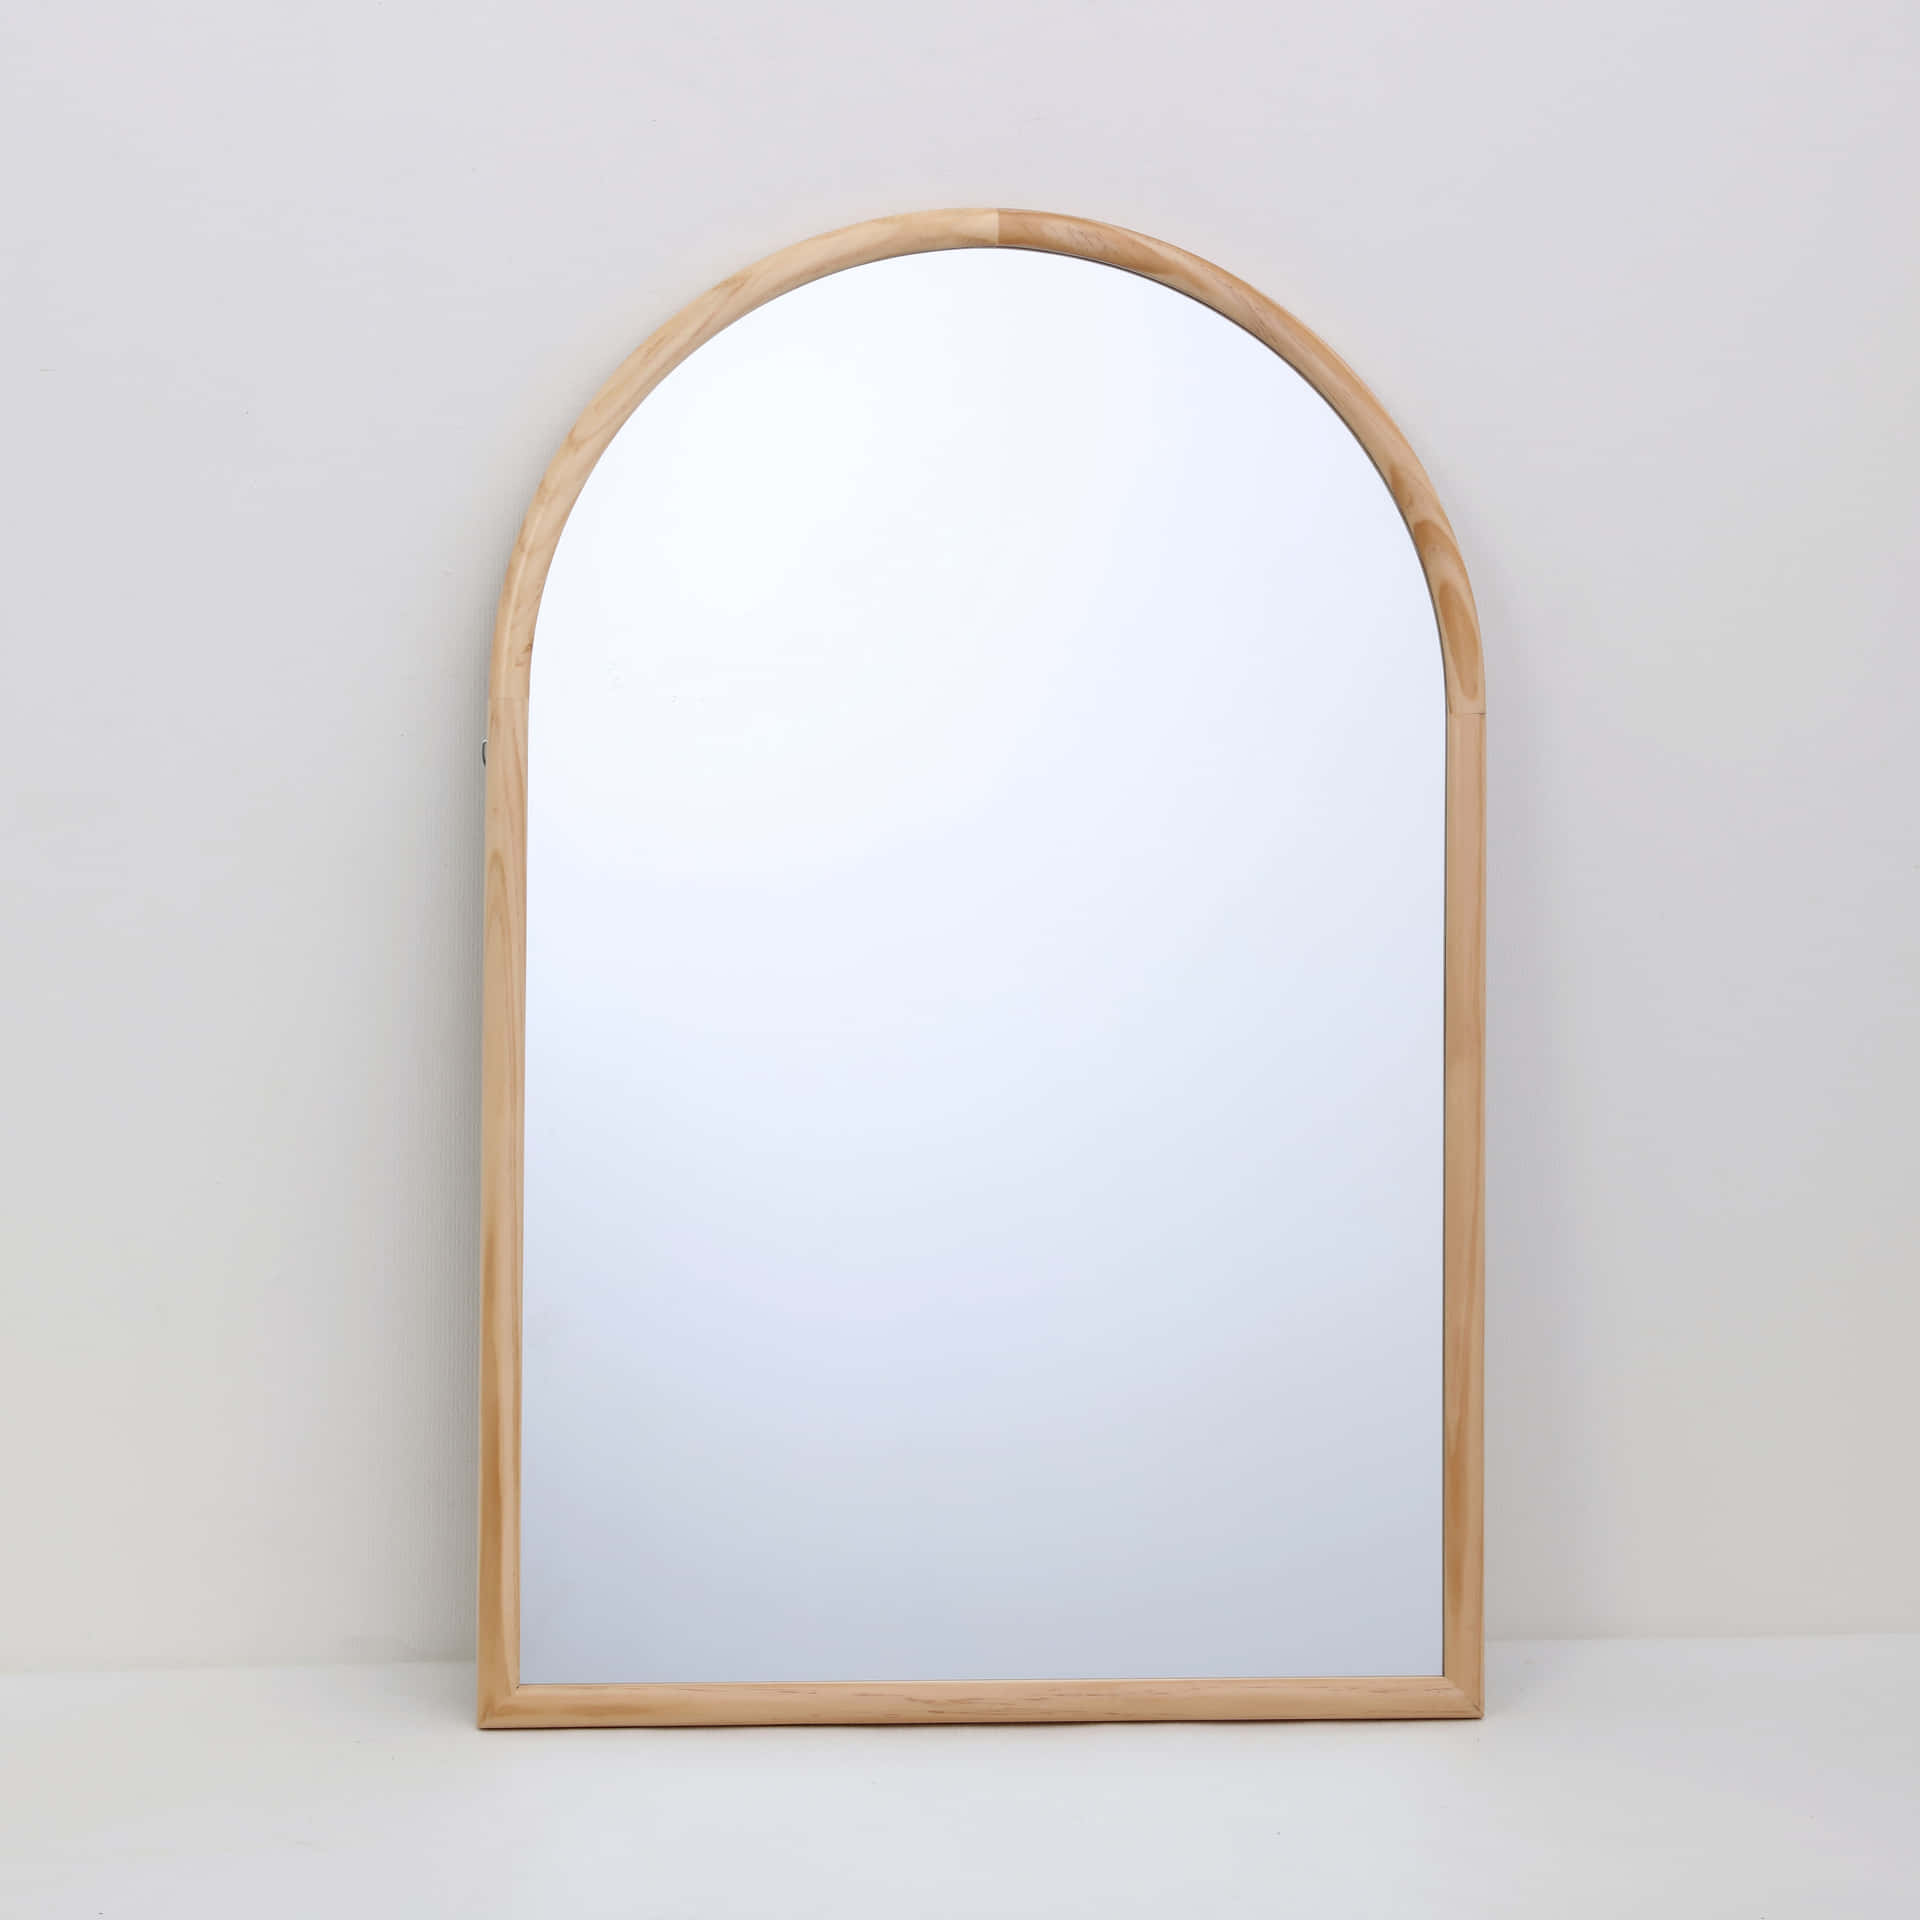 A Wooden Mirror With A Wooden Frame